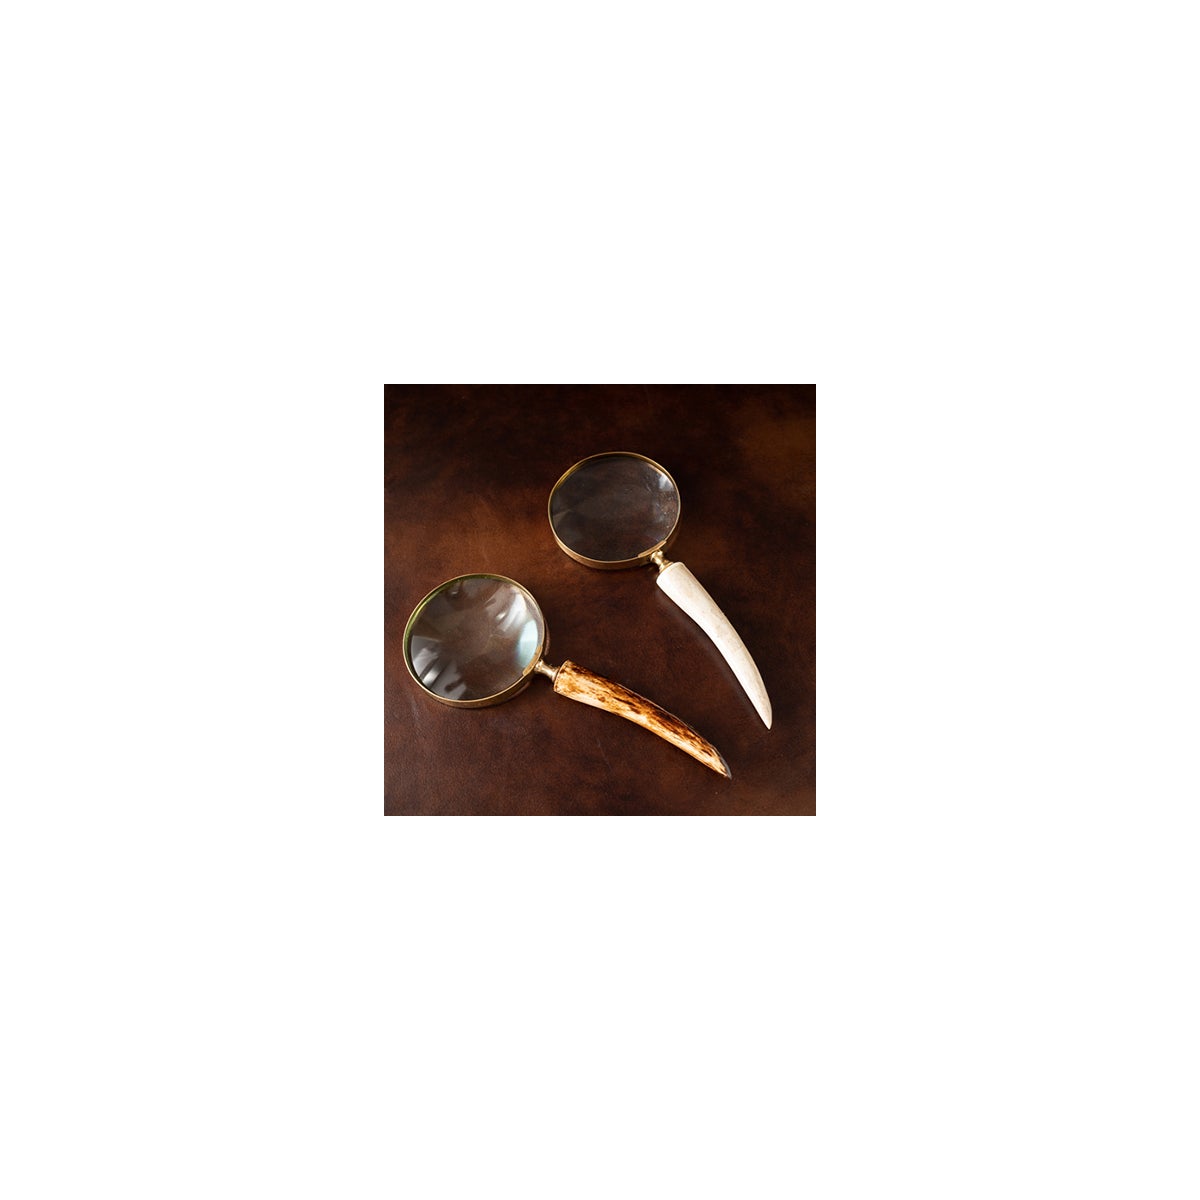 Horn Magnify Glass White and Brown Asst 2